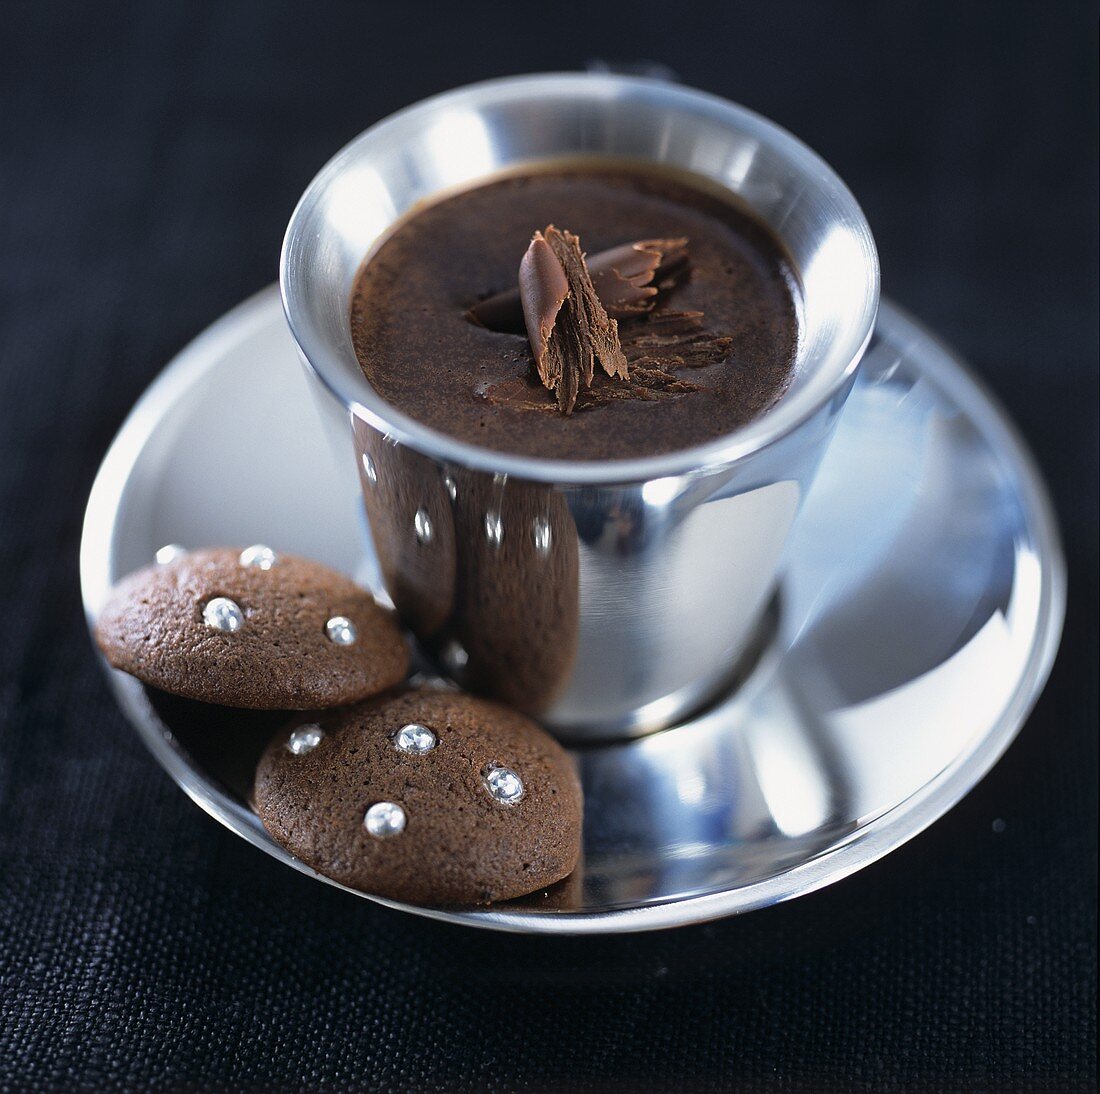 Hot chocolate with chocolate biscuits